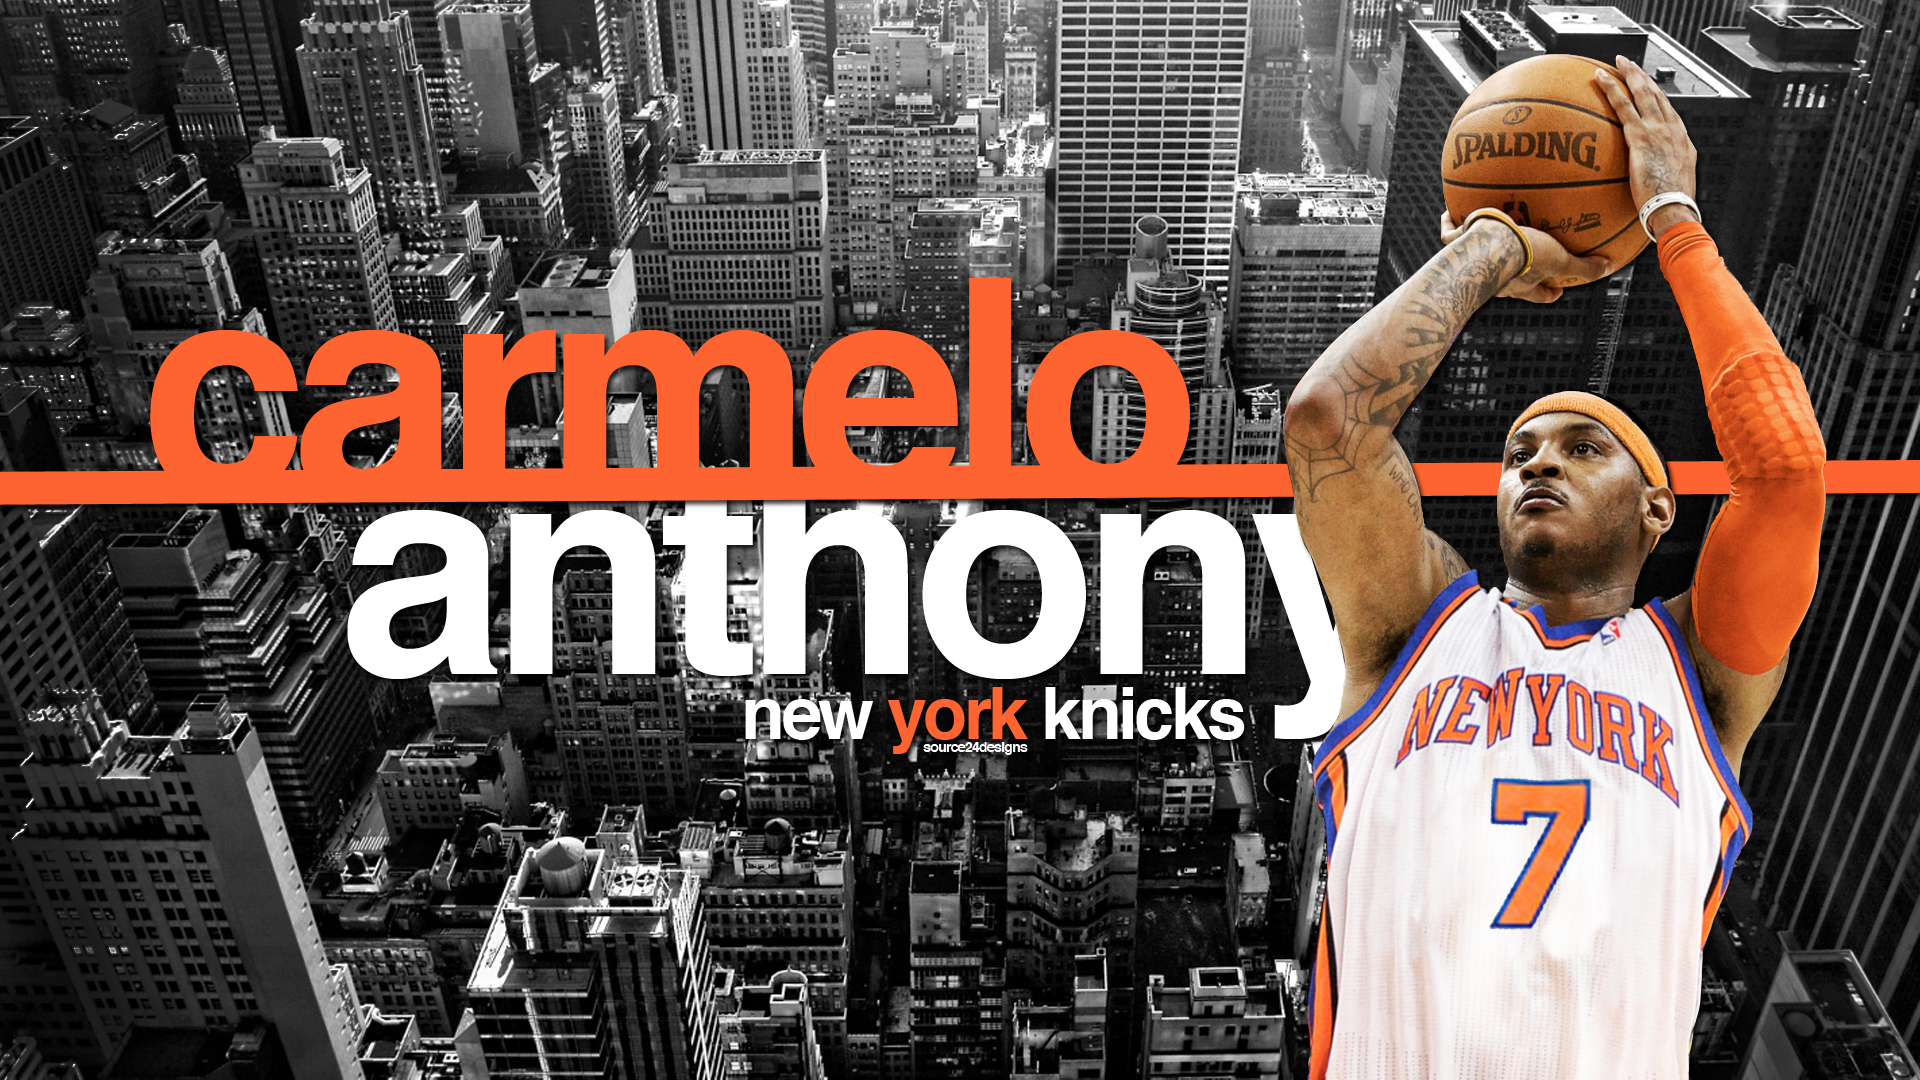 carmelo_anthony_new_york_knick_by_angelmaker666-d3a6s2n.jpg